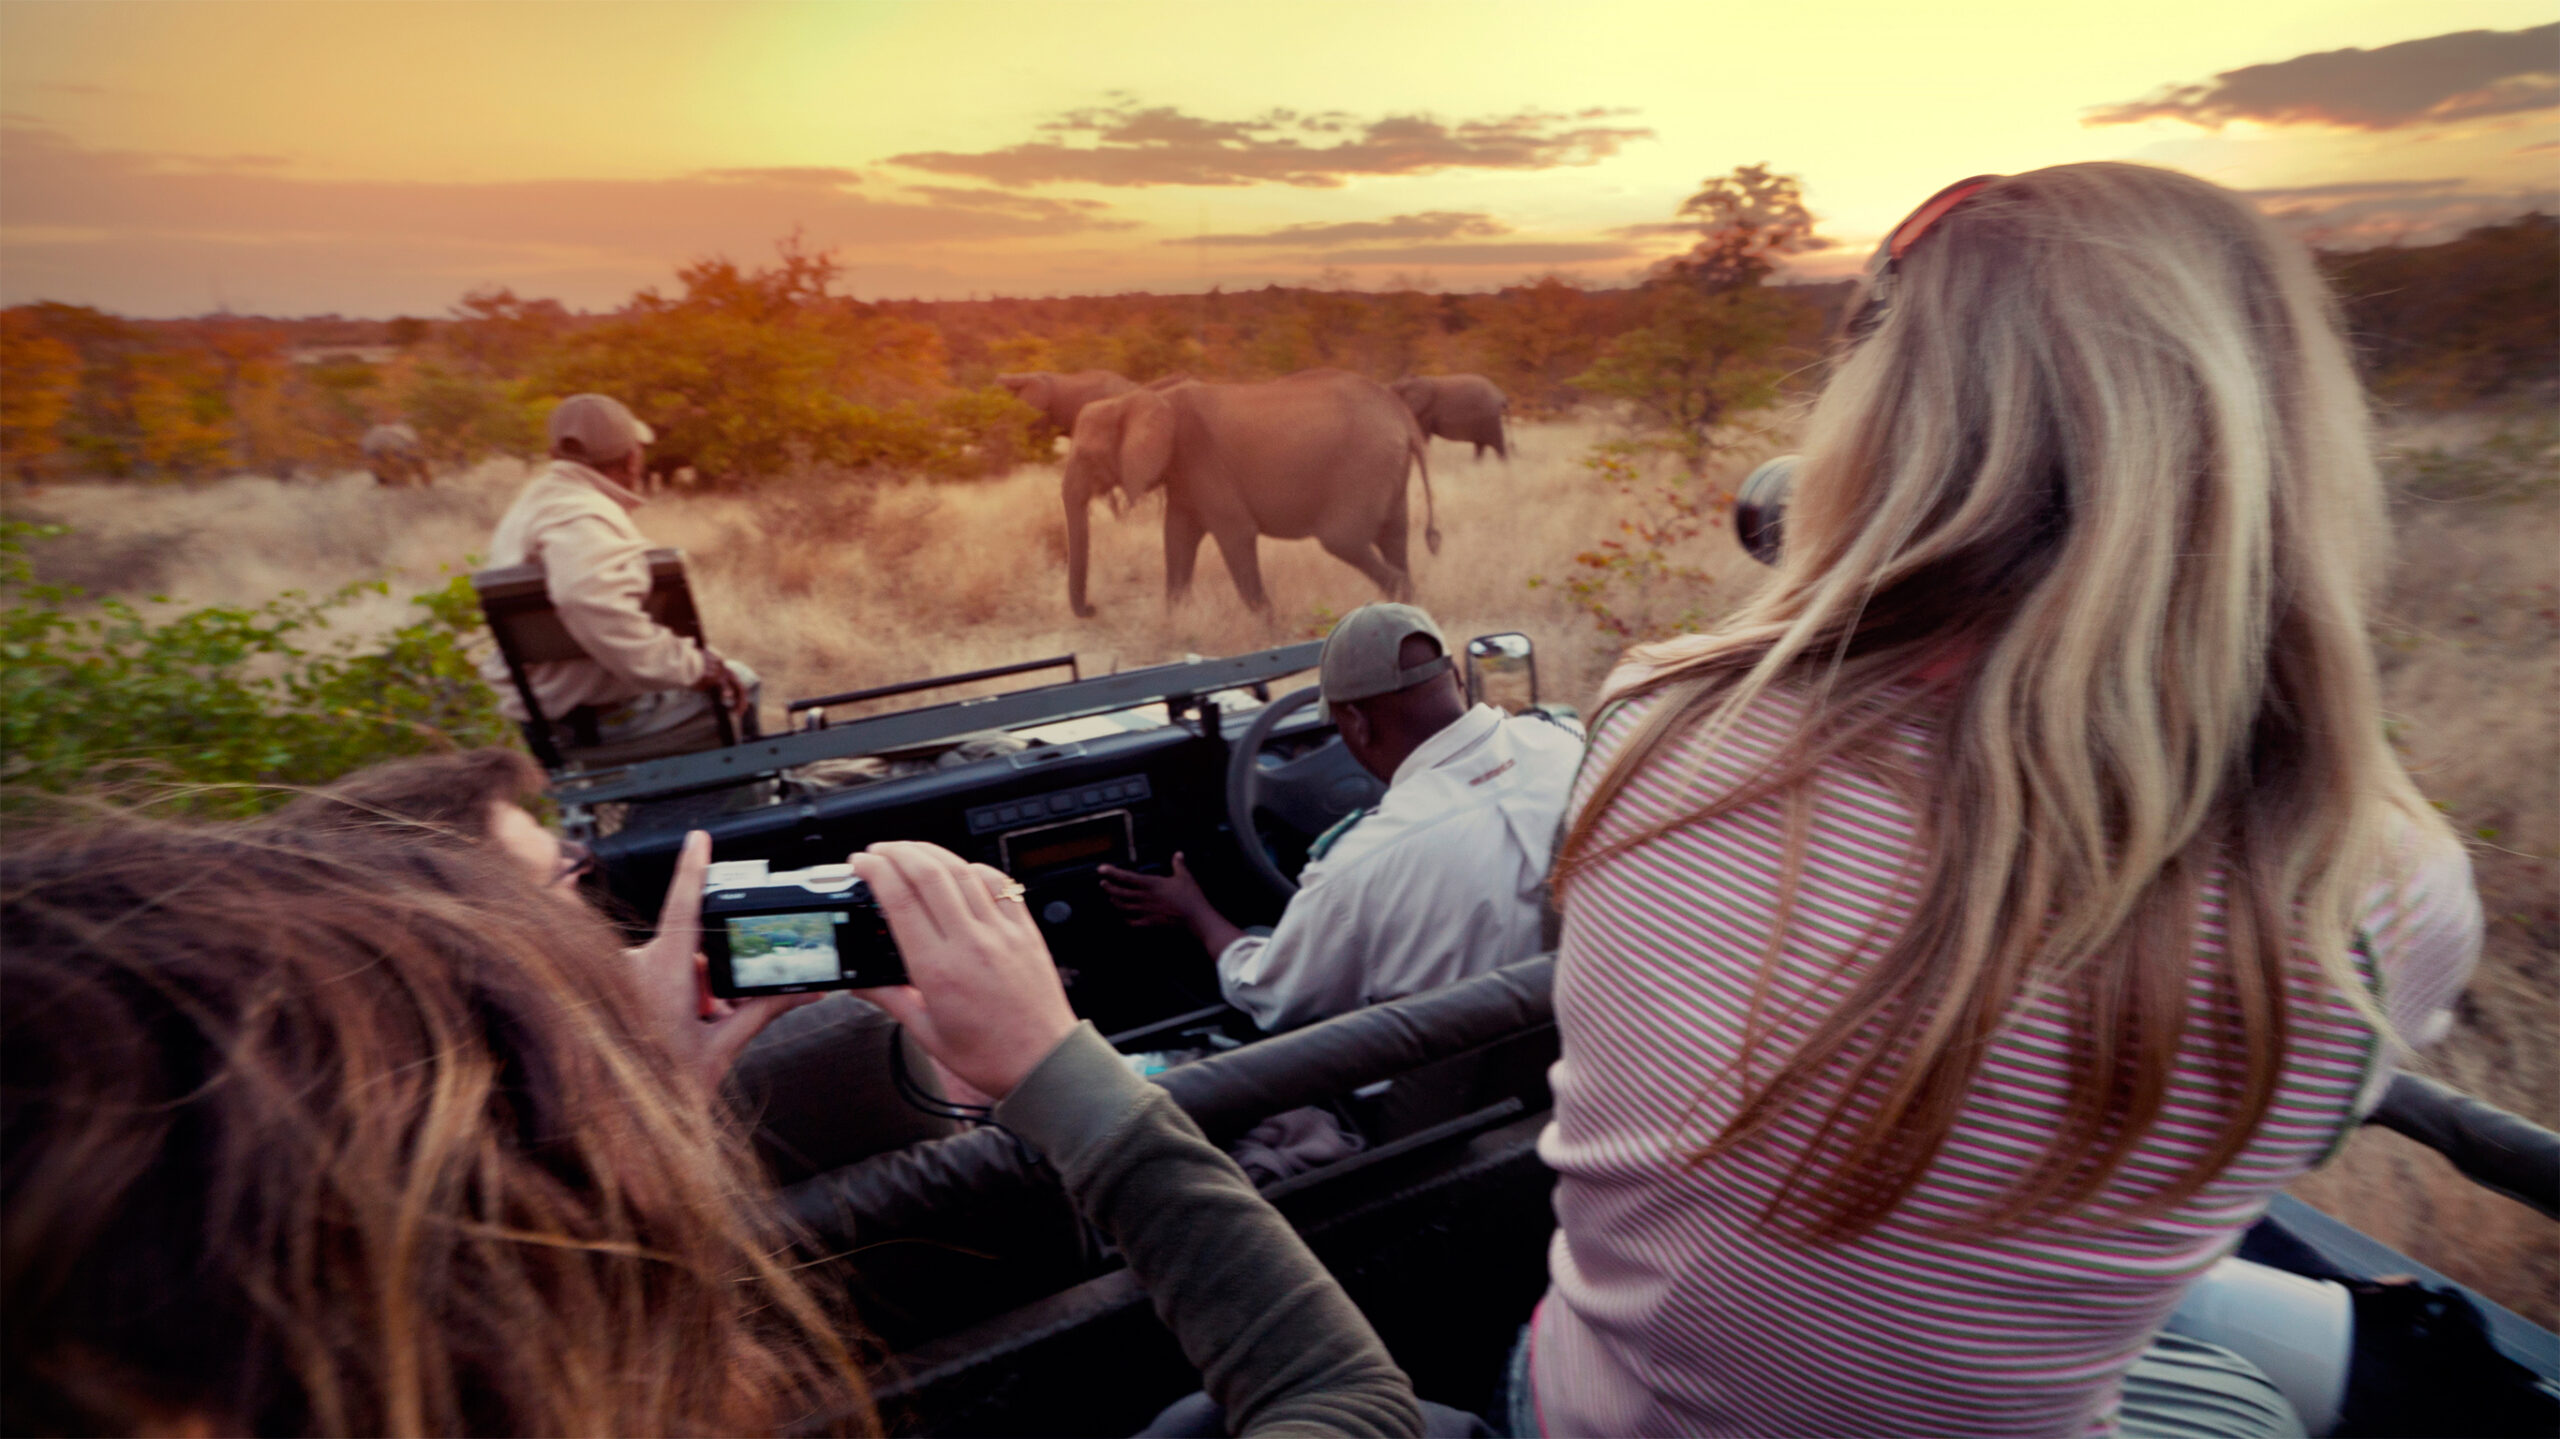 Safari Photography: Tips and Techniques For Capturing The Best Of South Africa